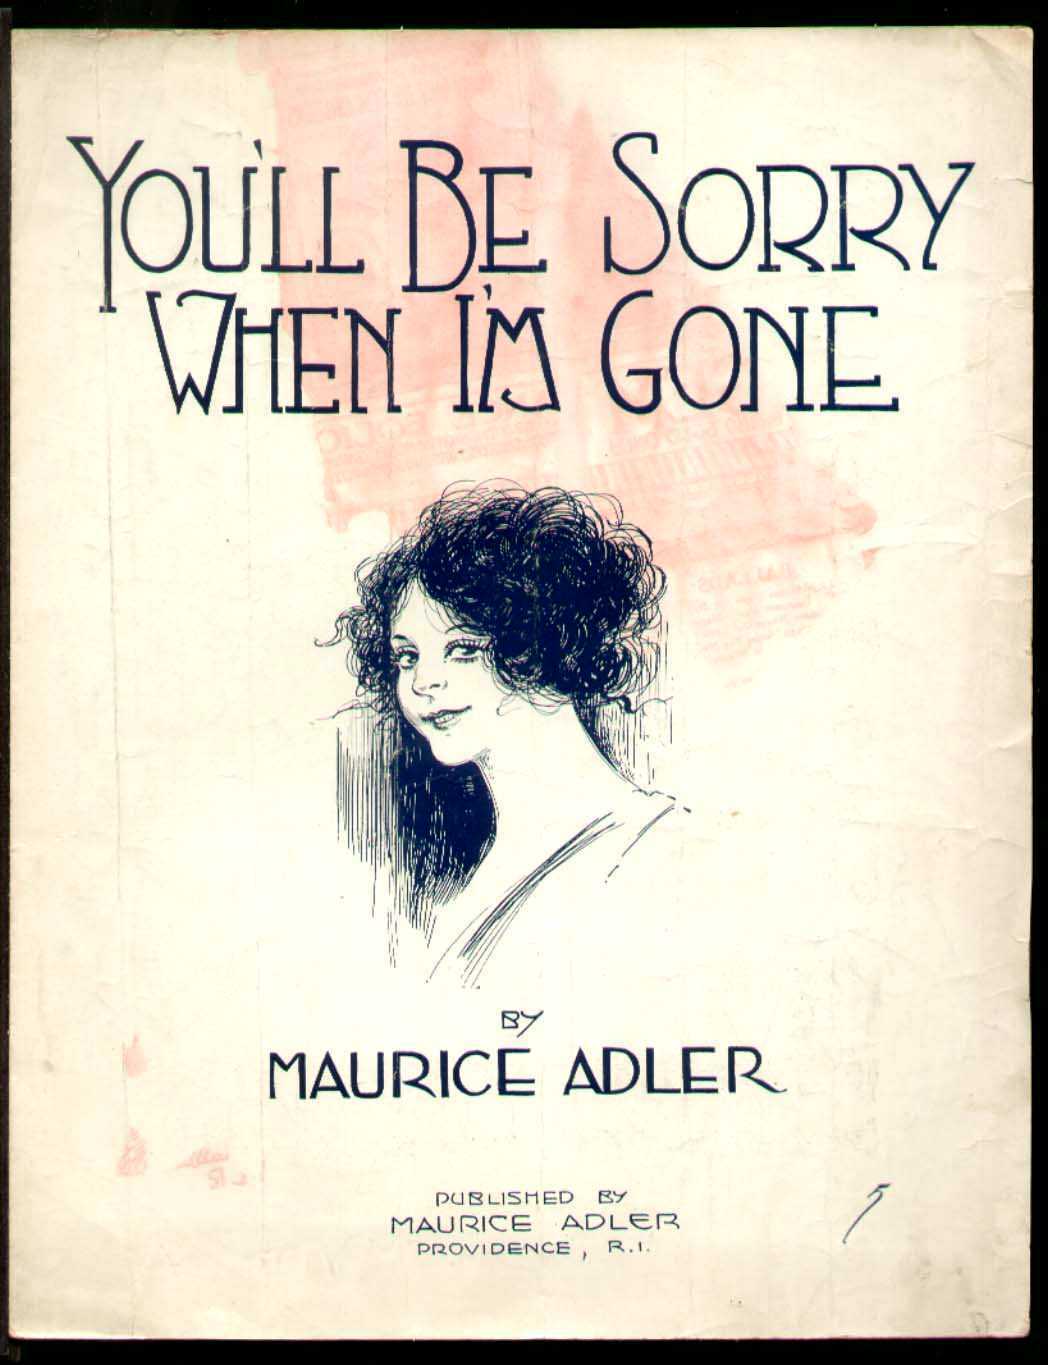 A vintage illustration on the cover of a piece of sheet music depicts a woman with messy hair, a long neck and long eyelashes, smirking at the viewer. The cover is black and white except for some pink smearing that probably are stains but might be part of the illustration; it's not clear. 